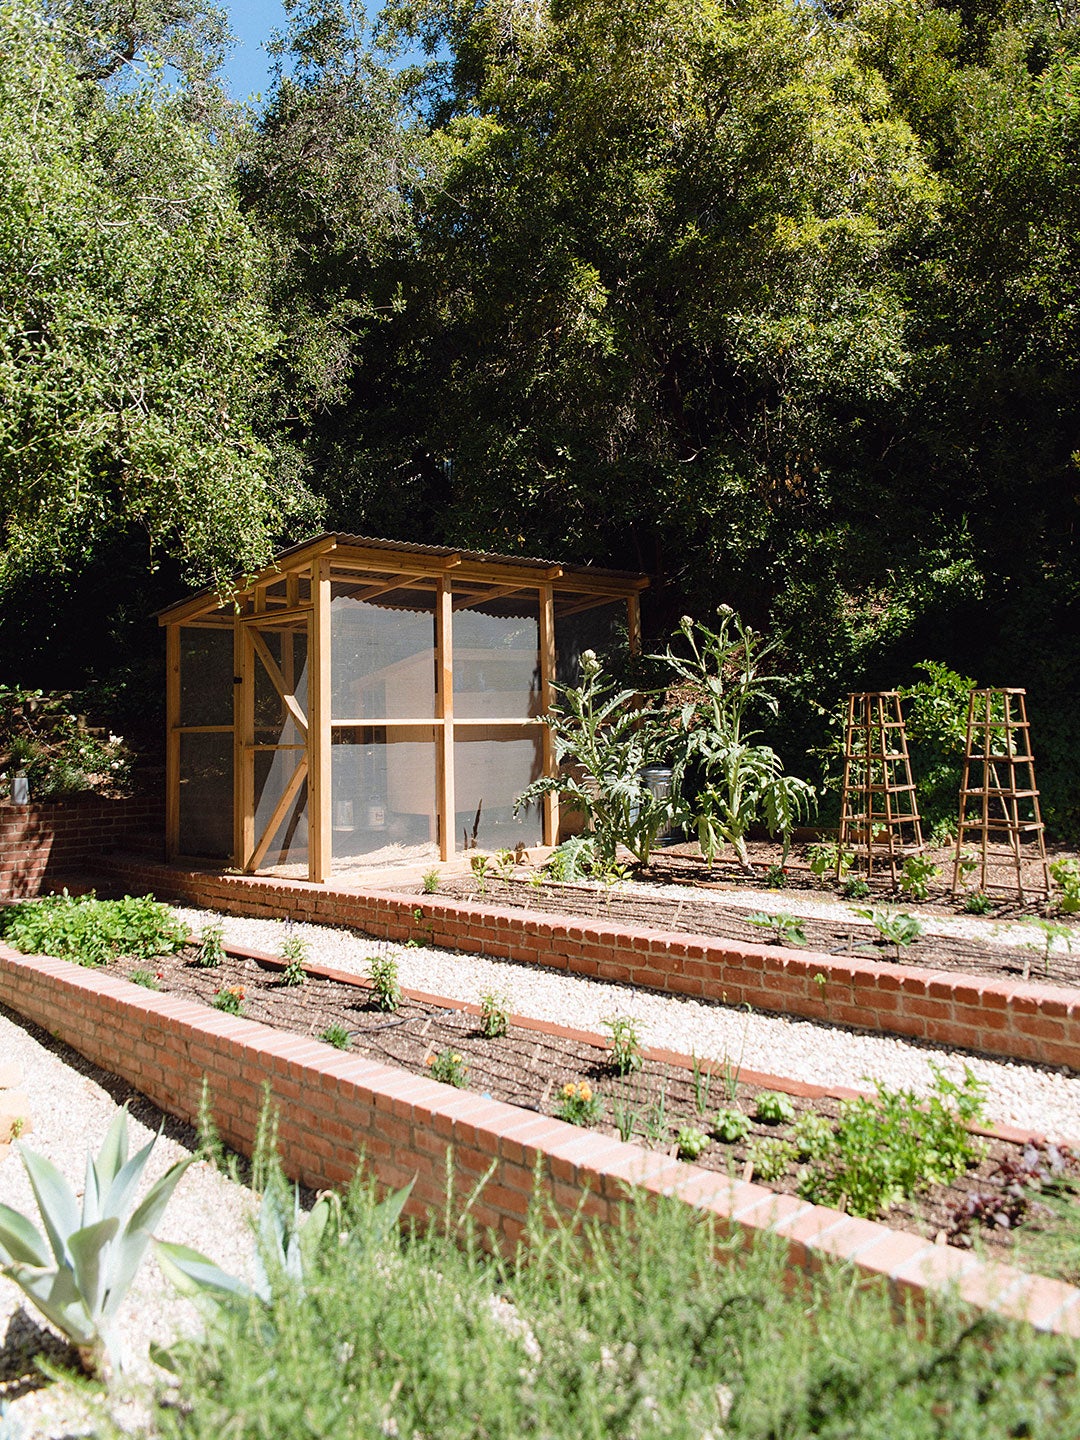 The Garden Beds in This L.A. Backyard Were Built From a “Stairway to Nowhere”